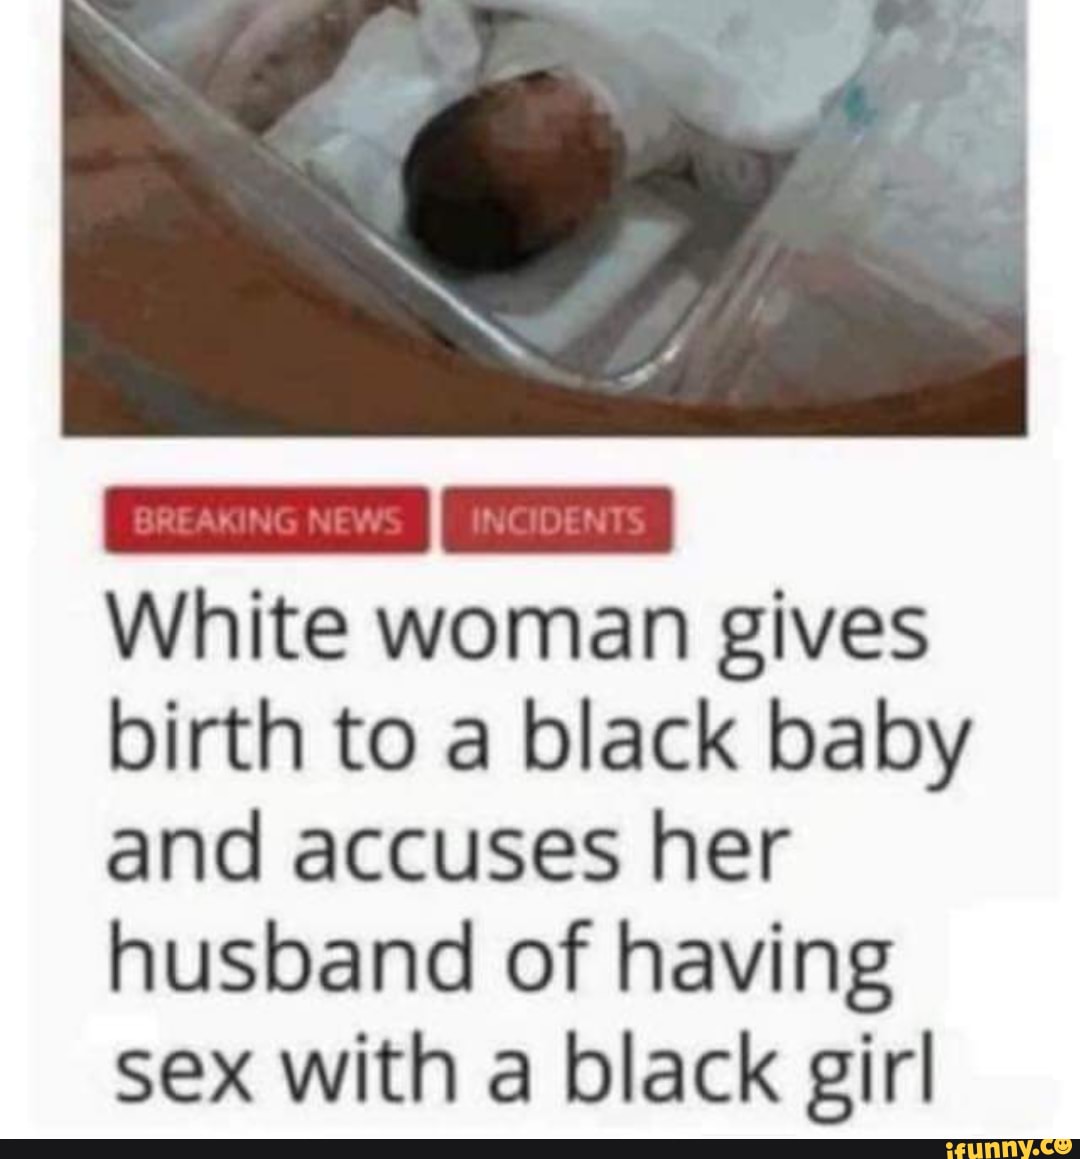 White woman gives birth to a black baby and accuses her husband of having sex with a black girl